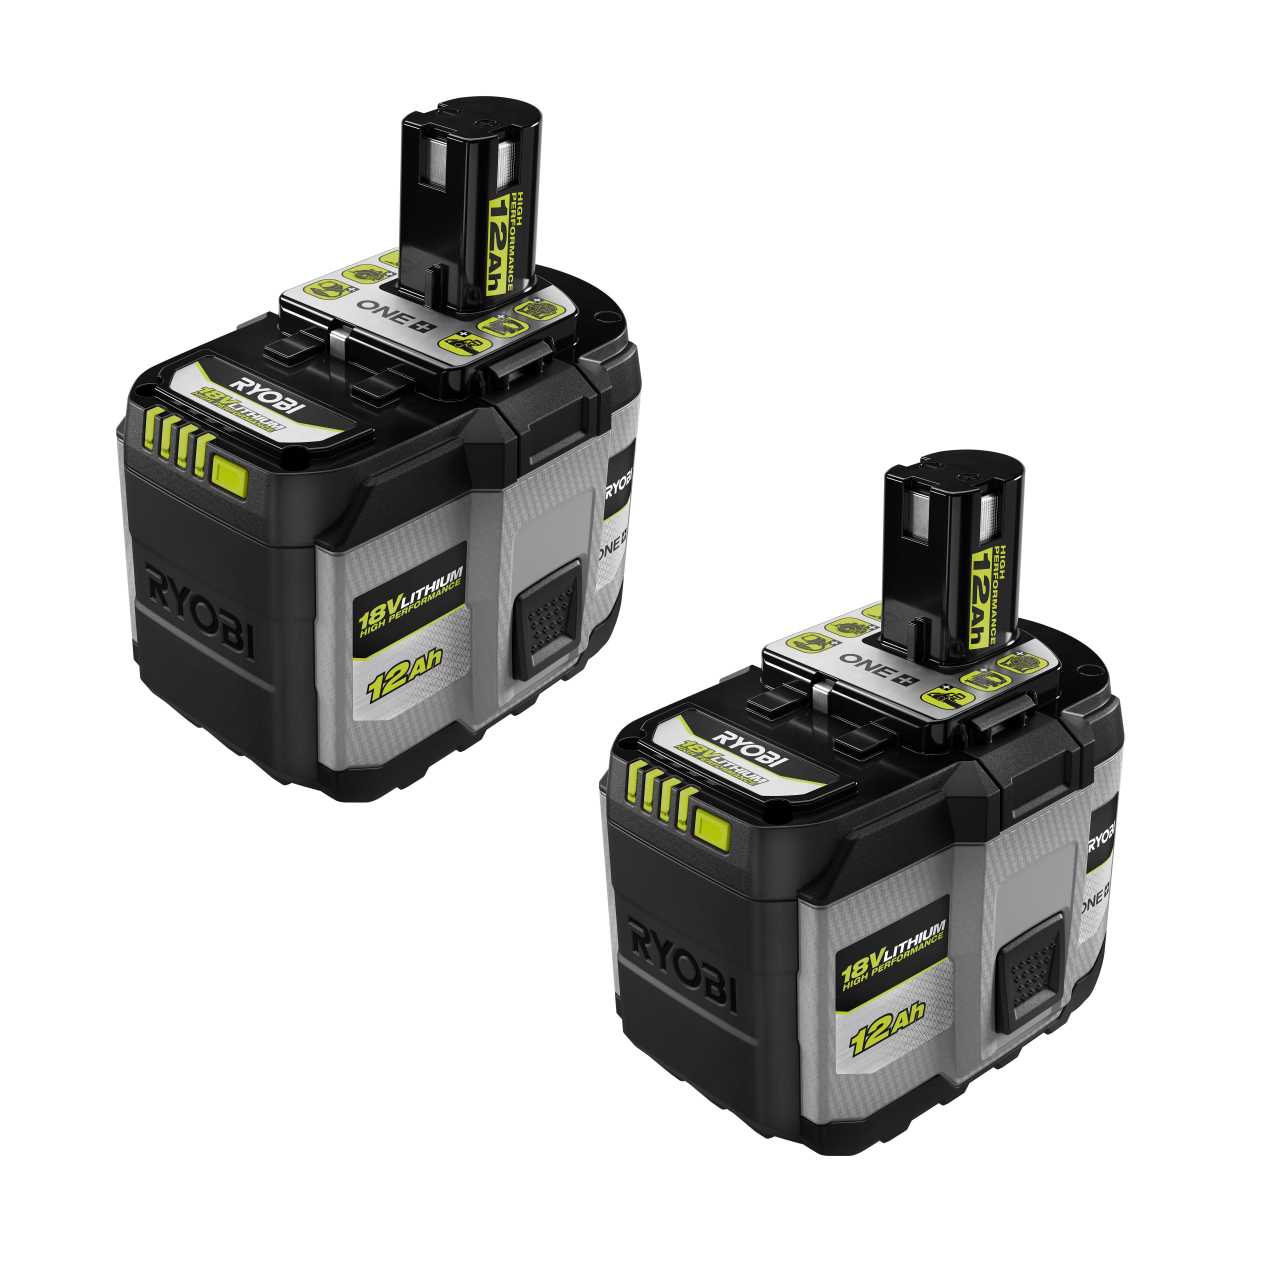 18V ONE+ 12AH LITHIUM HIGH PERFORMANCE BATTERY (2 PACK)